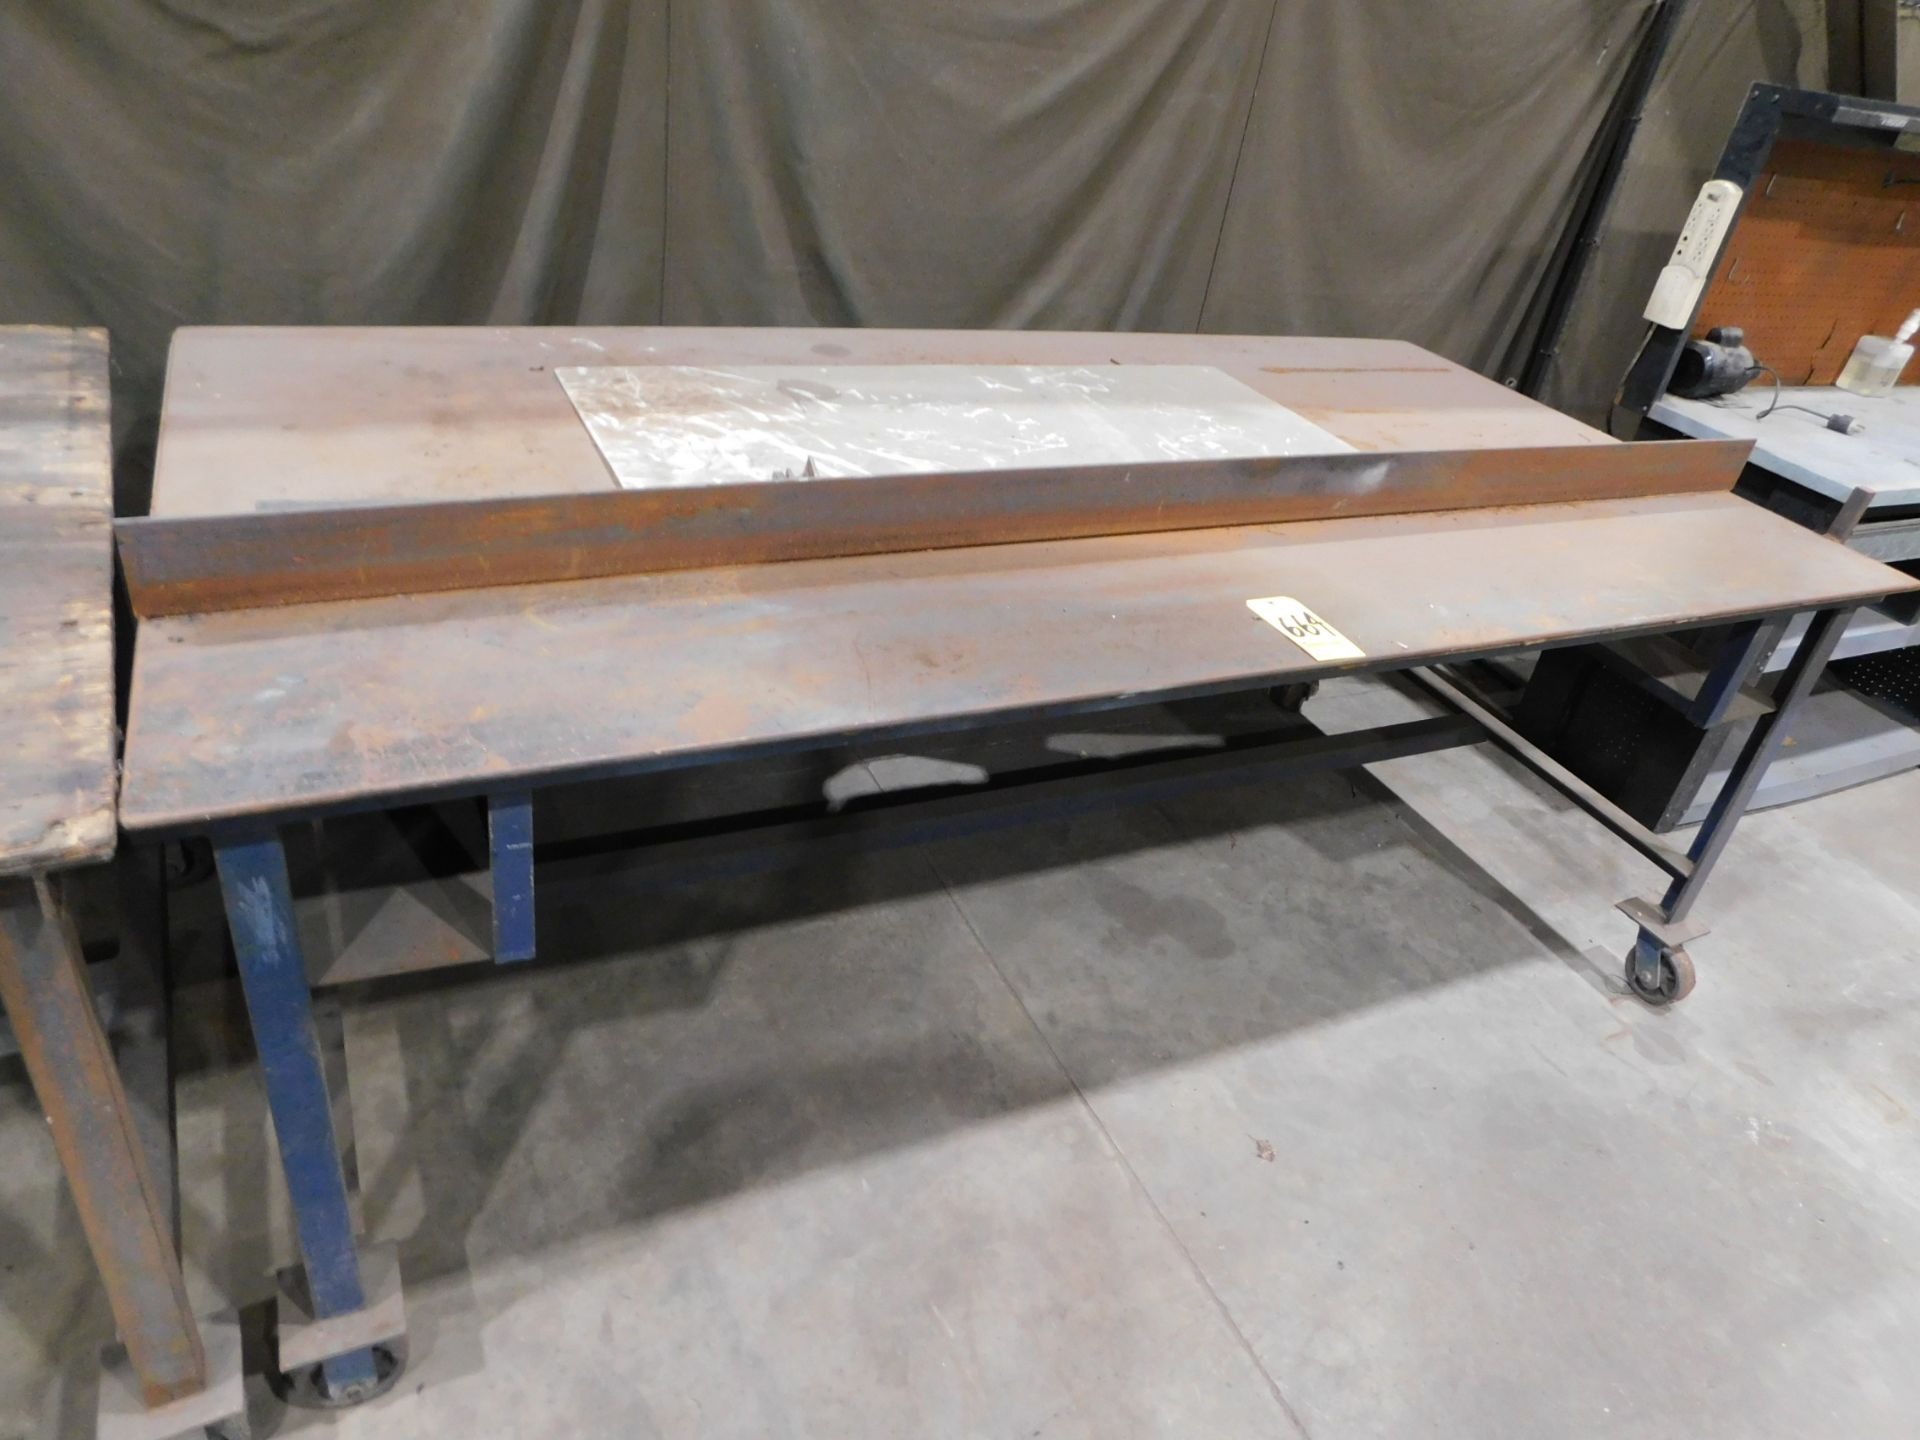 Shop Table on Casters, Steel Top, 4' X 8' X 36" High